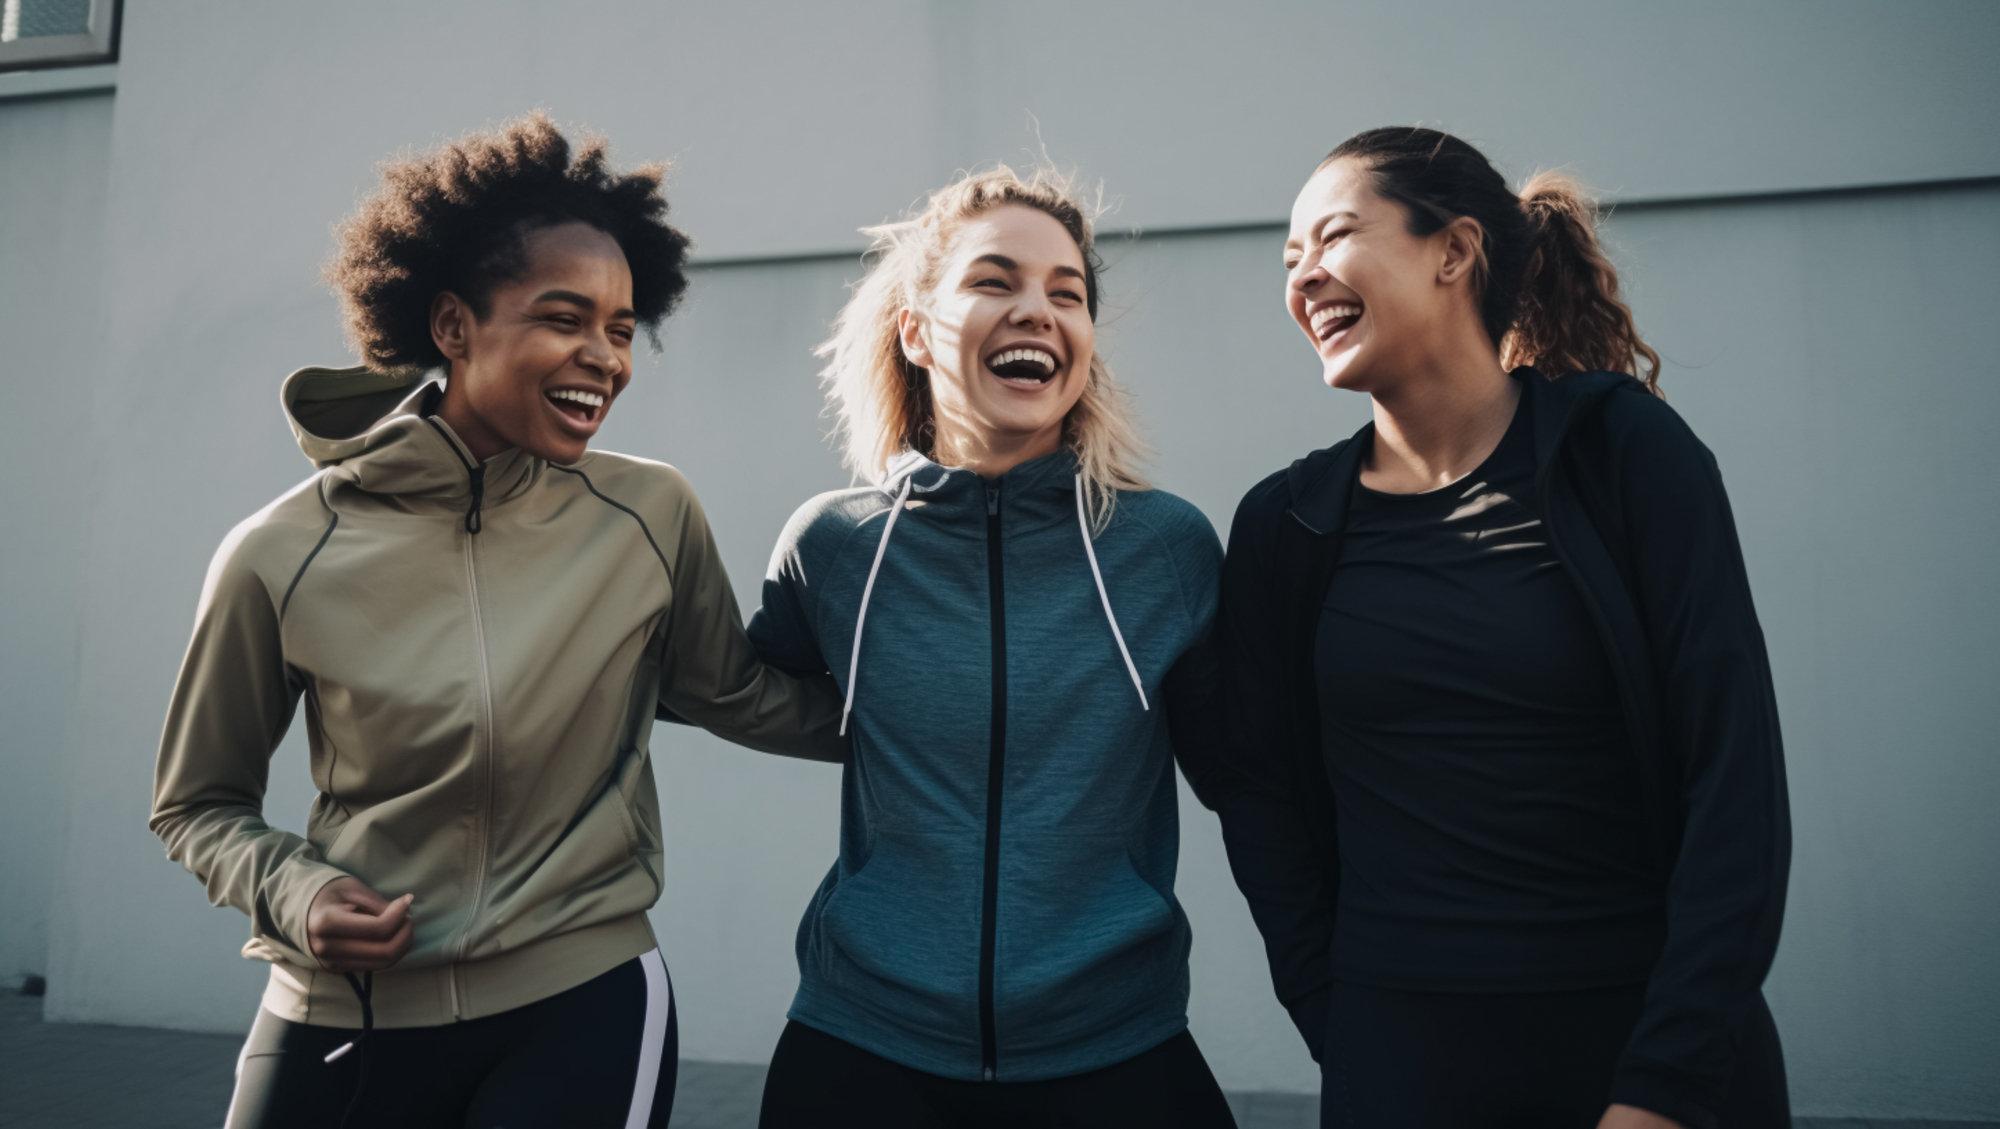 Women in sport outfit laughing because they are happy about hormone therapy in lincoln park